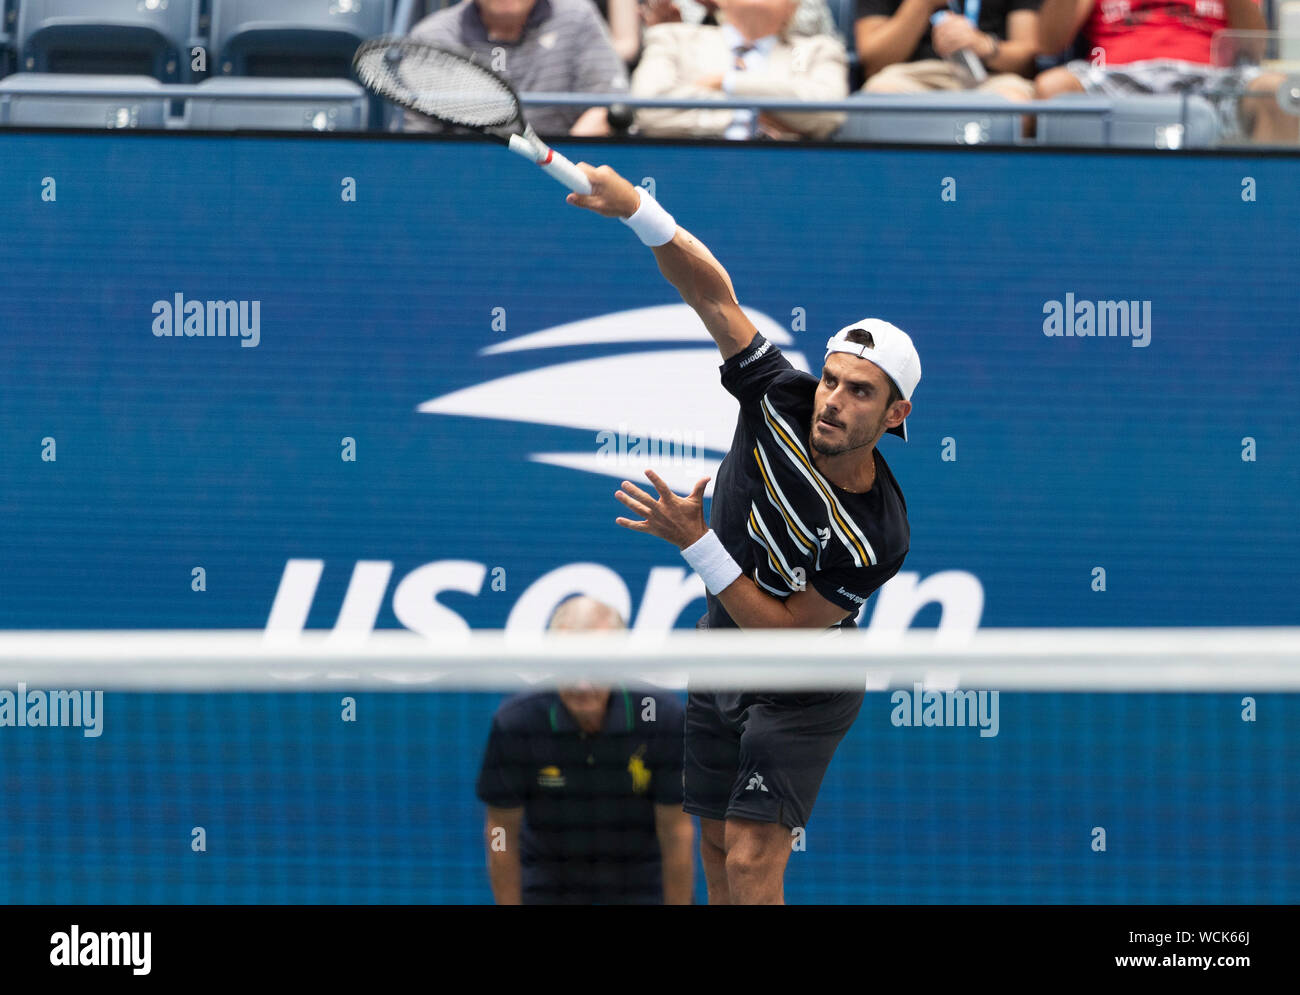 New York, United States. 27th Aug, 2019. Thomas Fabbiano (Italy) in action during round 1 of US Open Tennis Championship against Dominic Thiem (Austria) at Billie Jean King National Tennis Center (Photo by Lev Radin/Pacific Press) Credit: Pacific Press Agency/Alamy Live News Stock Photo